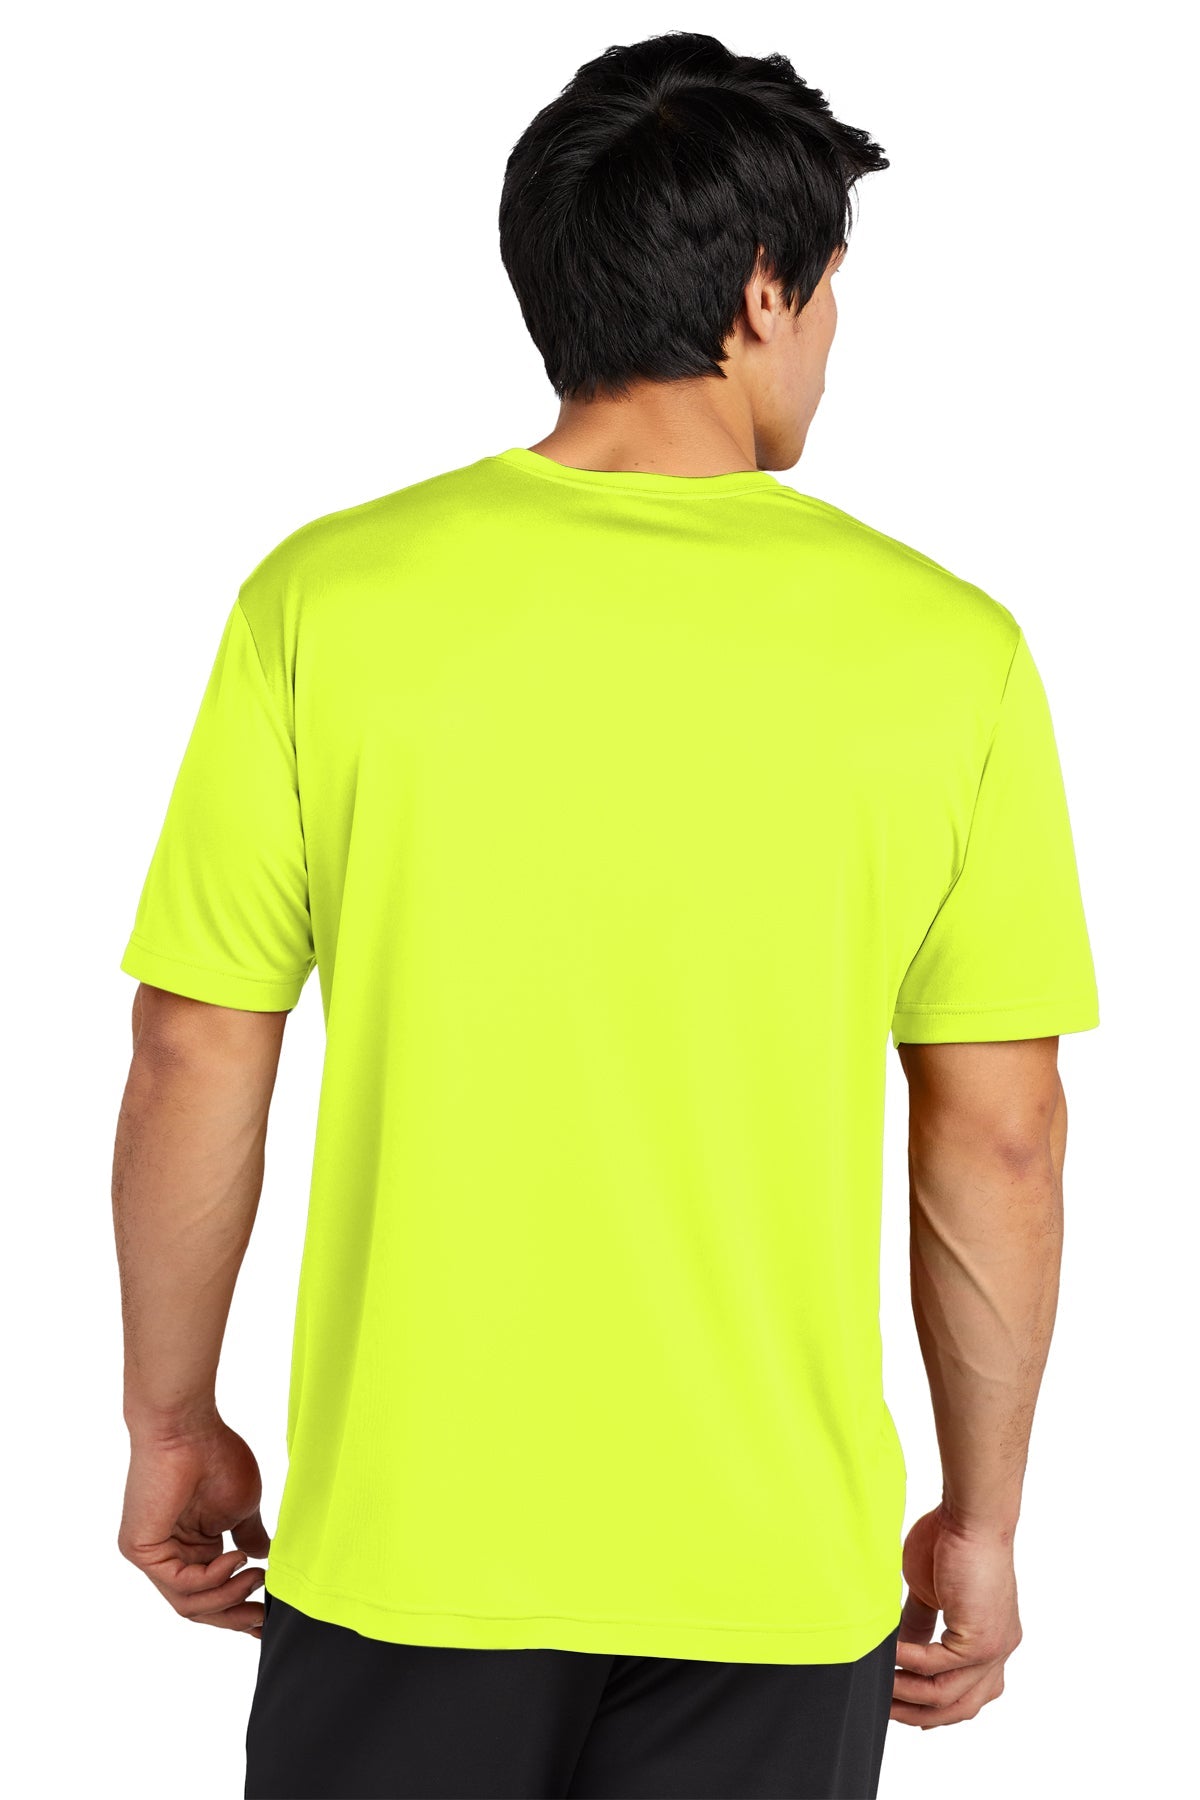 Sport-Tek PosiCharge Customized Re-Compete Tee's, Neon Yellow